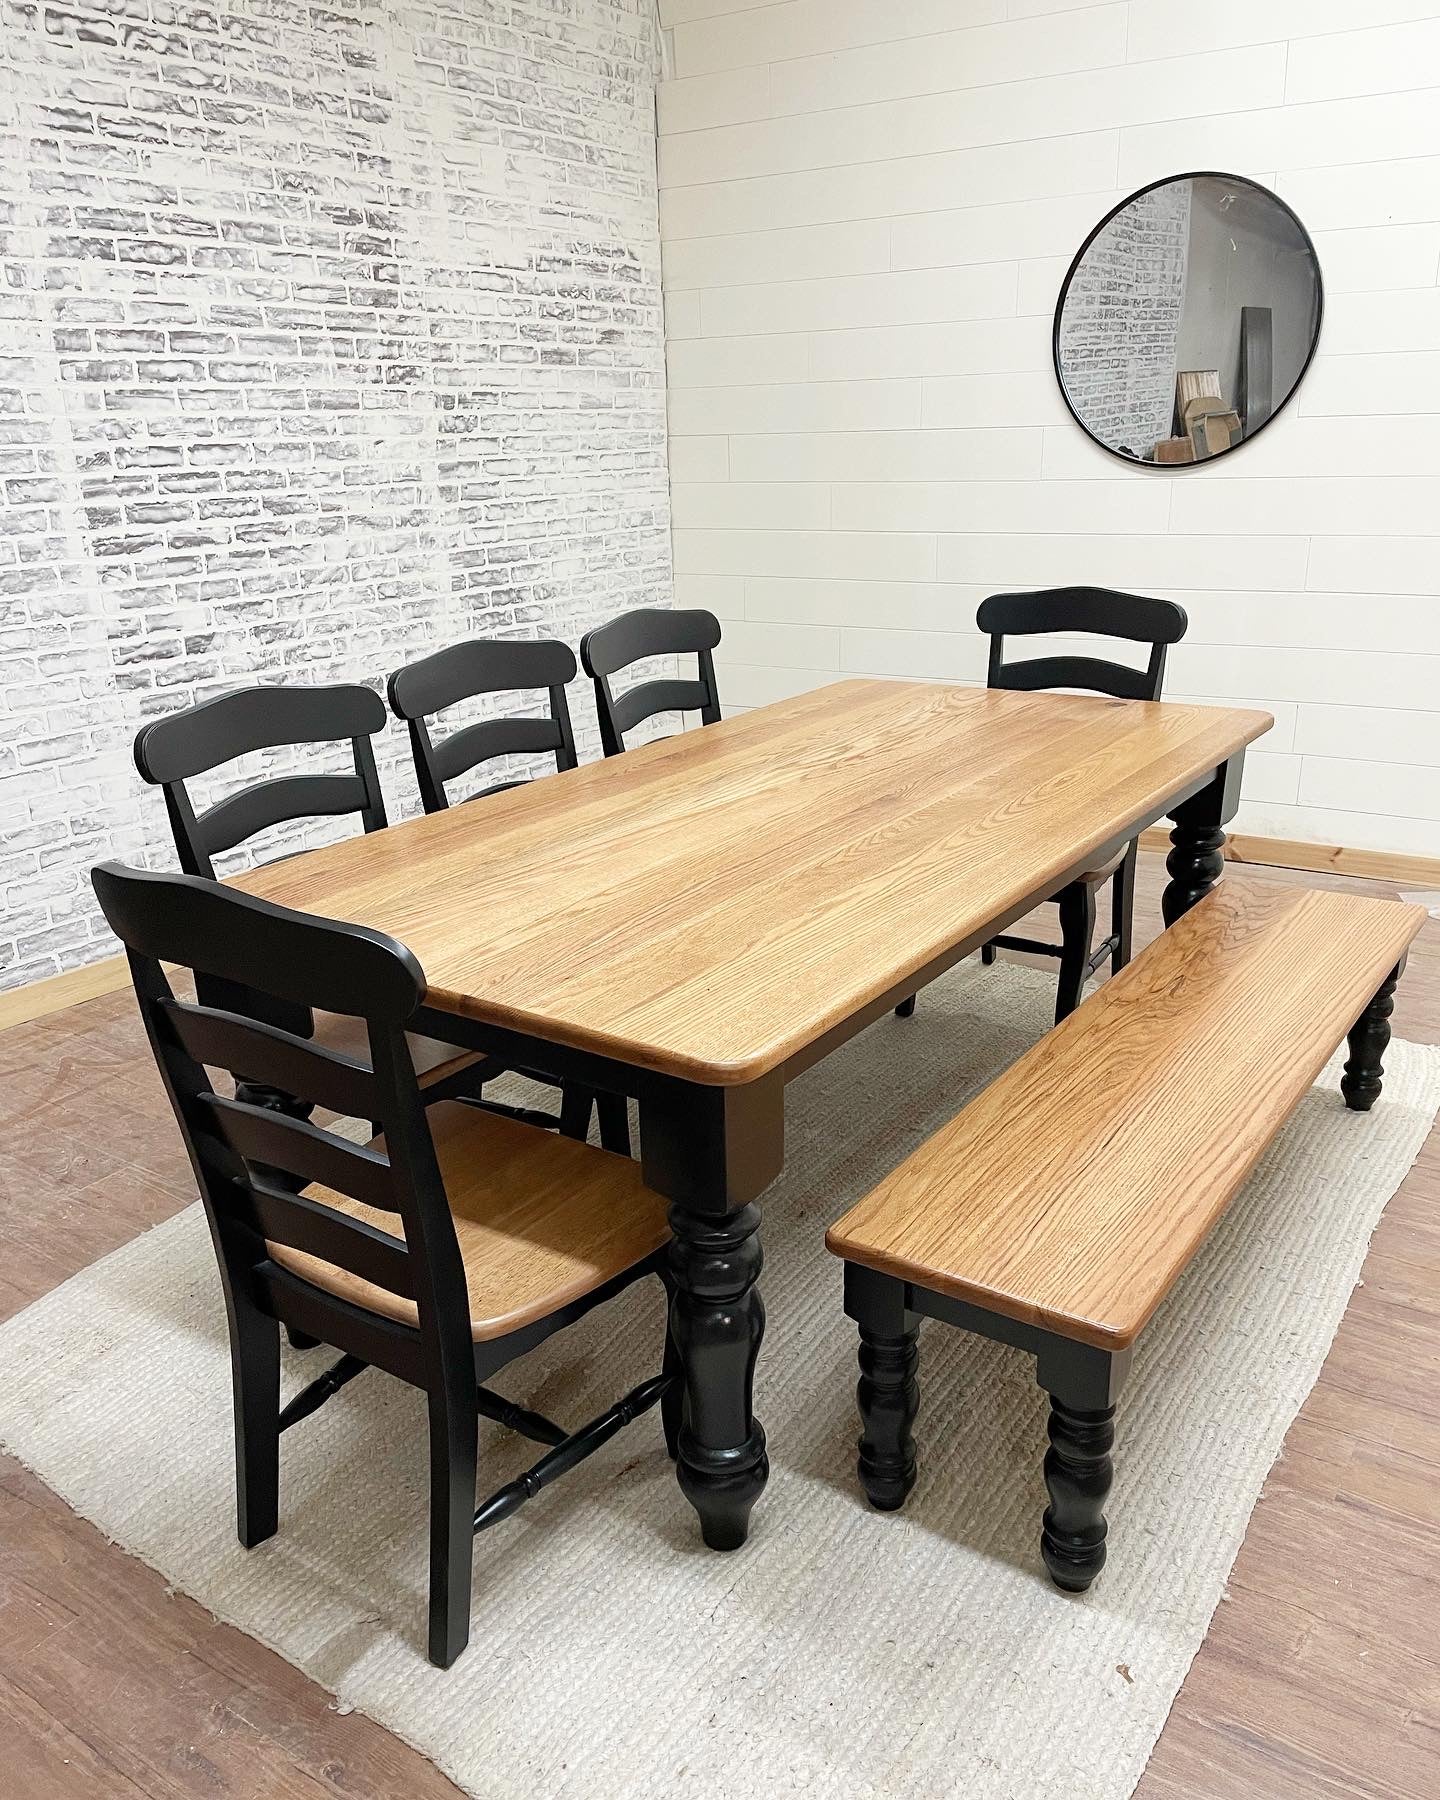 Pictured with an 8' L x 42" W Red Oak top with a Natural Finish and a painted Black base. Pictured with a Matching Bench and 5 French Country Dining Chairs.